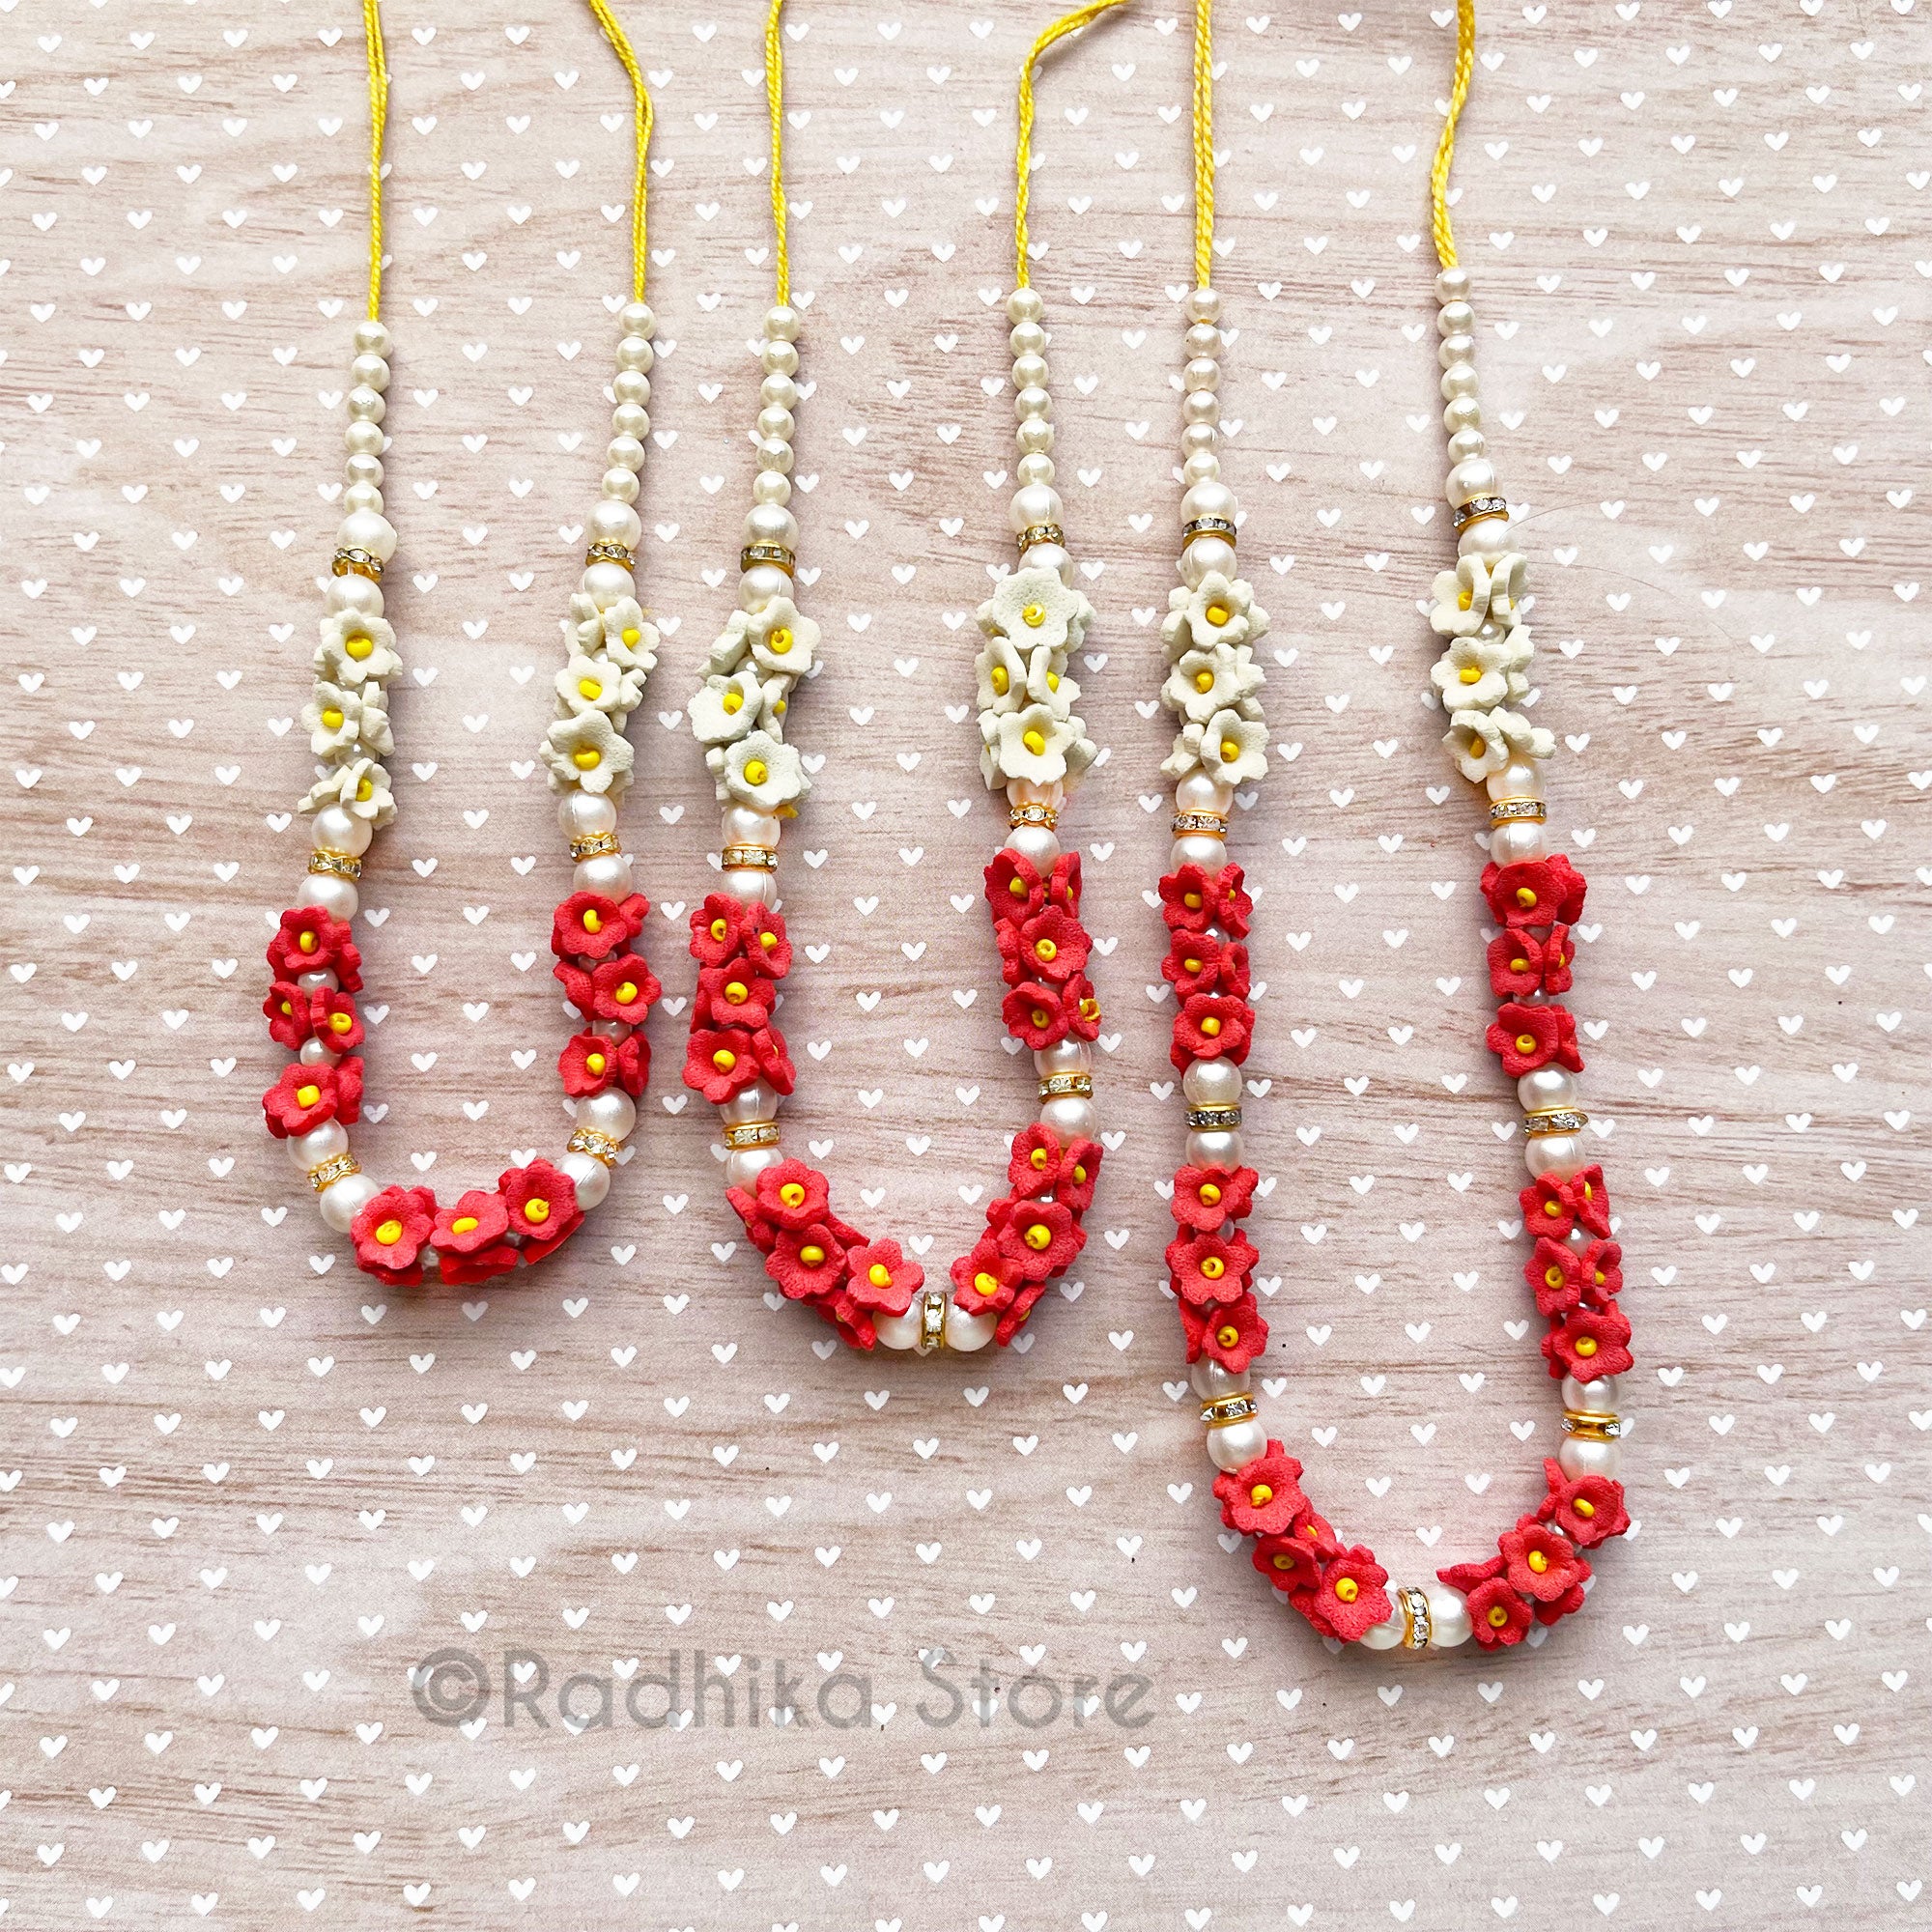 Red and White Vrindavan Flower Necklace